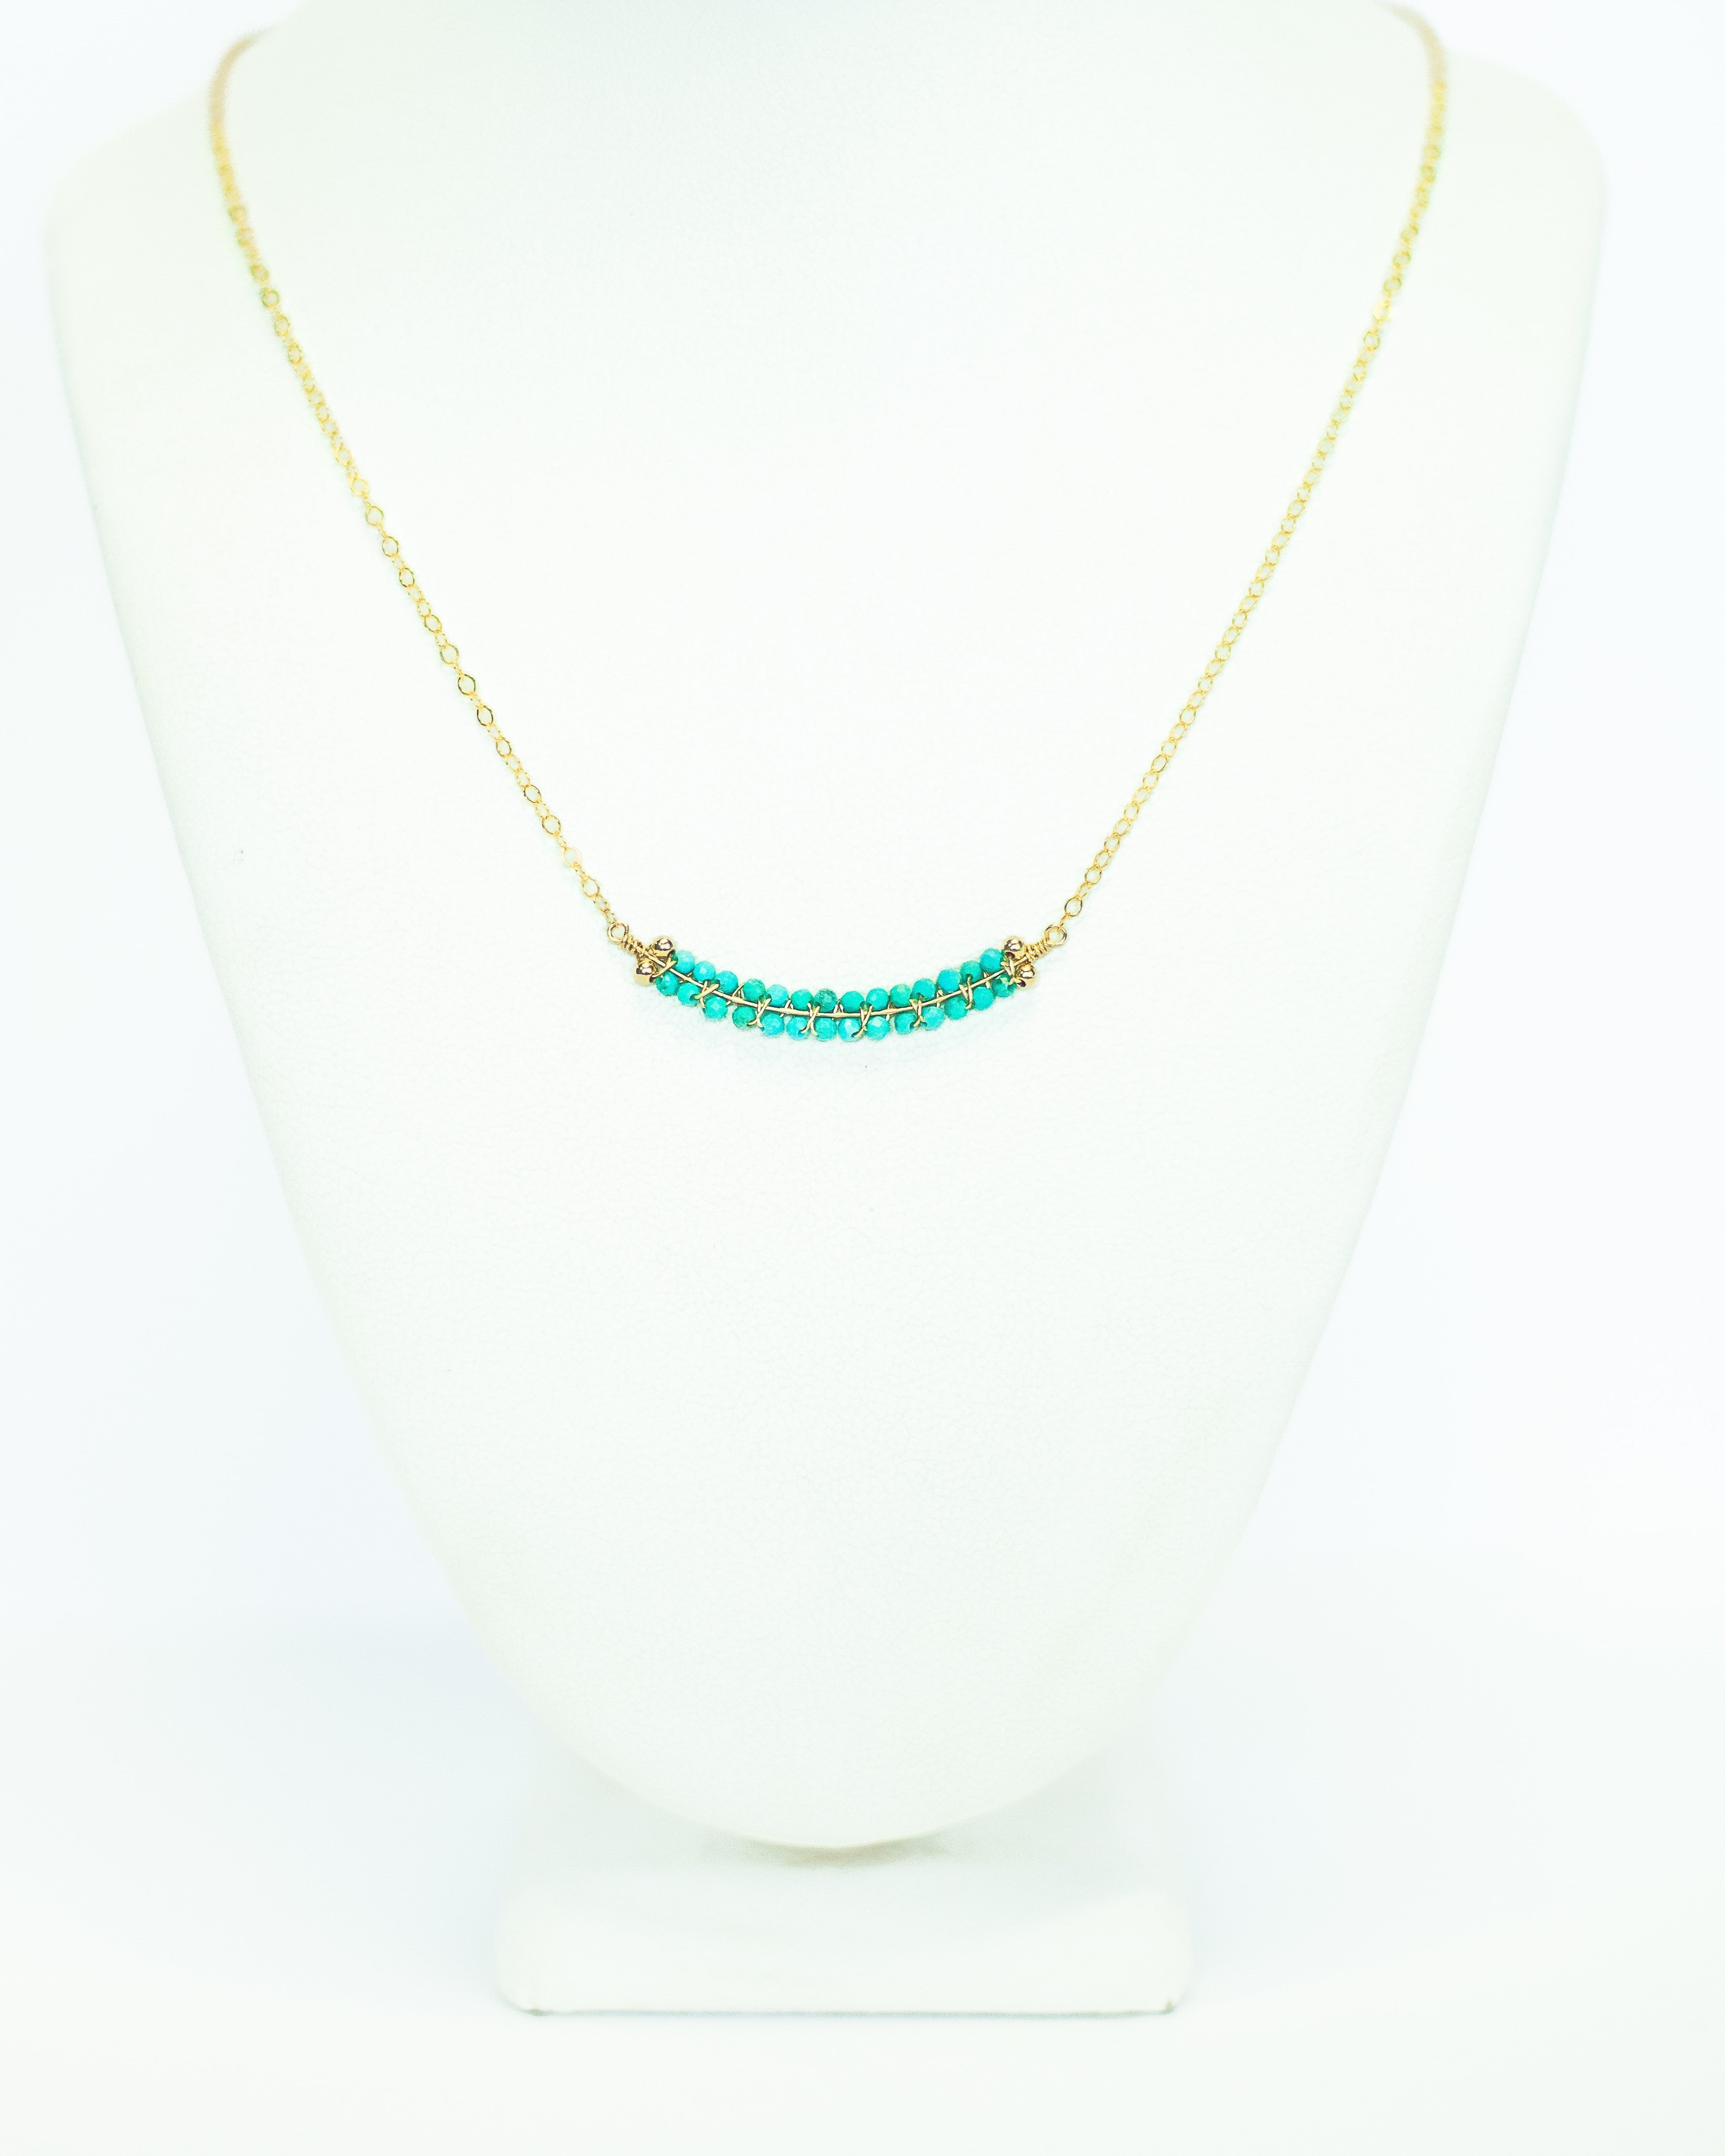 Turquoise Necklace by Julia Balestracci